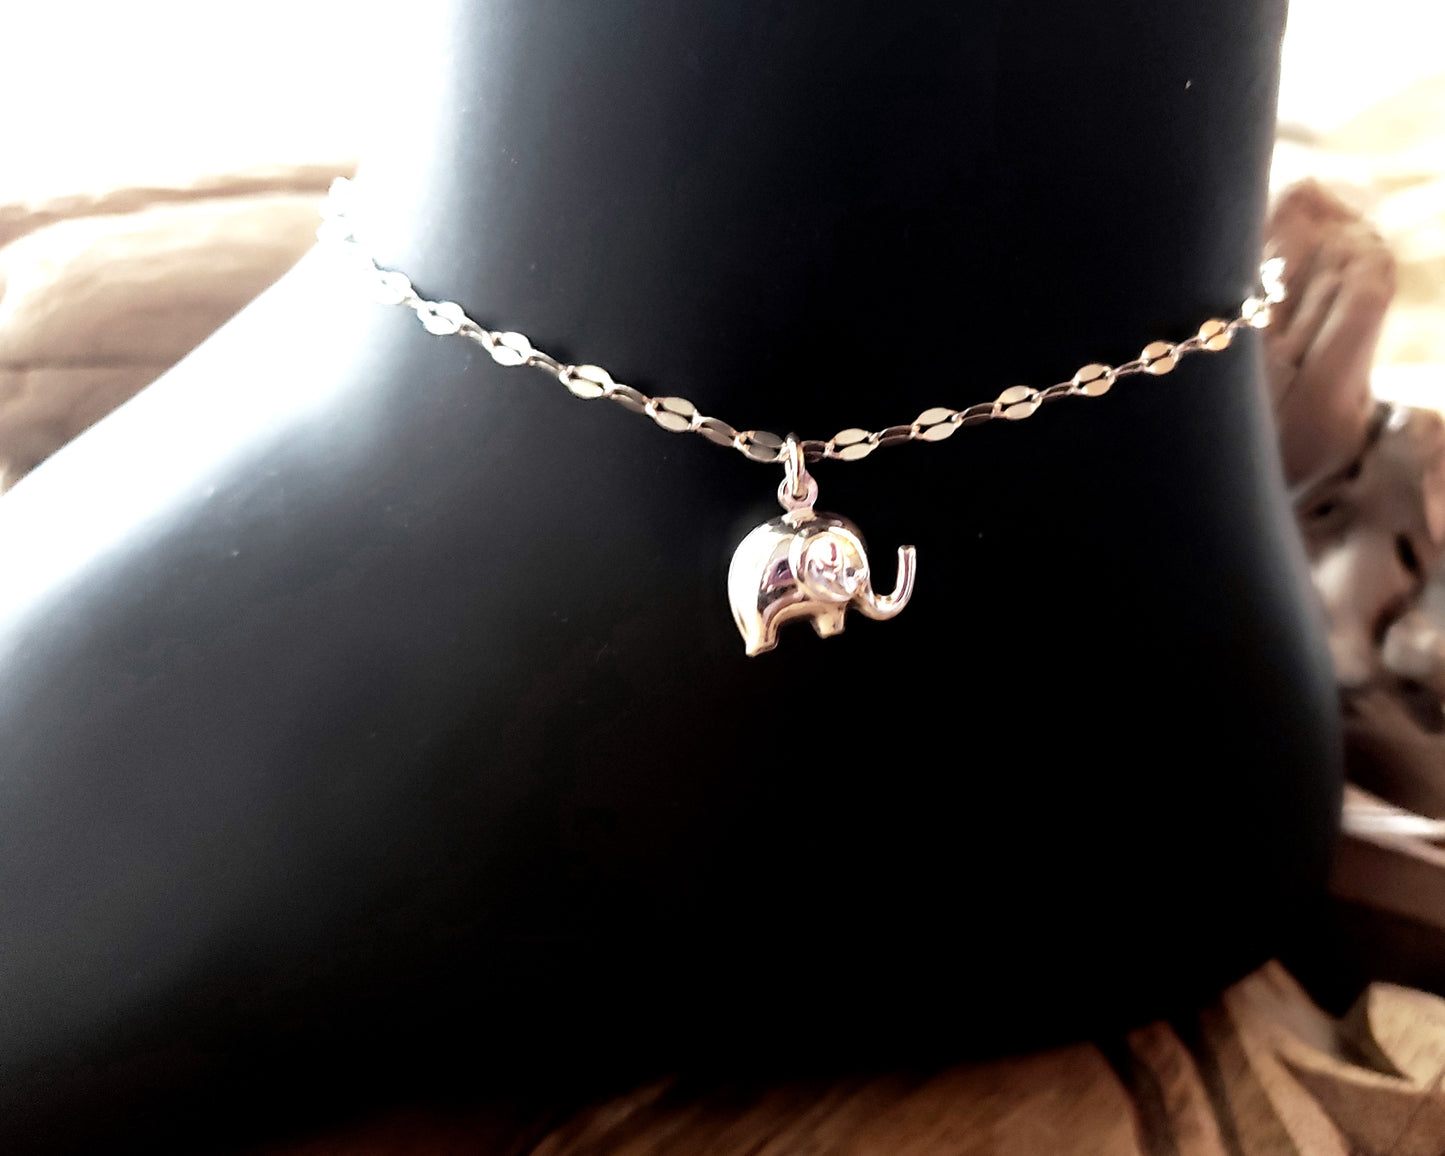 Puffy Elephant Anklet-Ankle Bracelet-Handmade-Sterling Silver-Elephant on Decorative Silver Chain